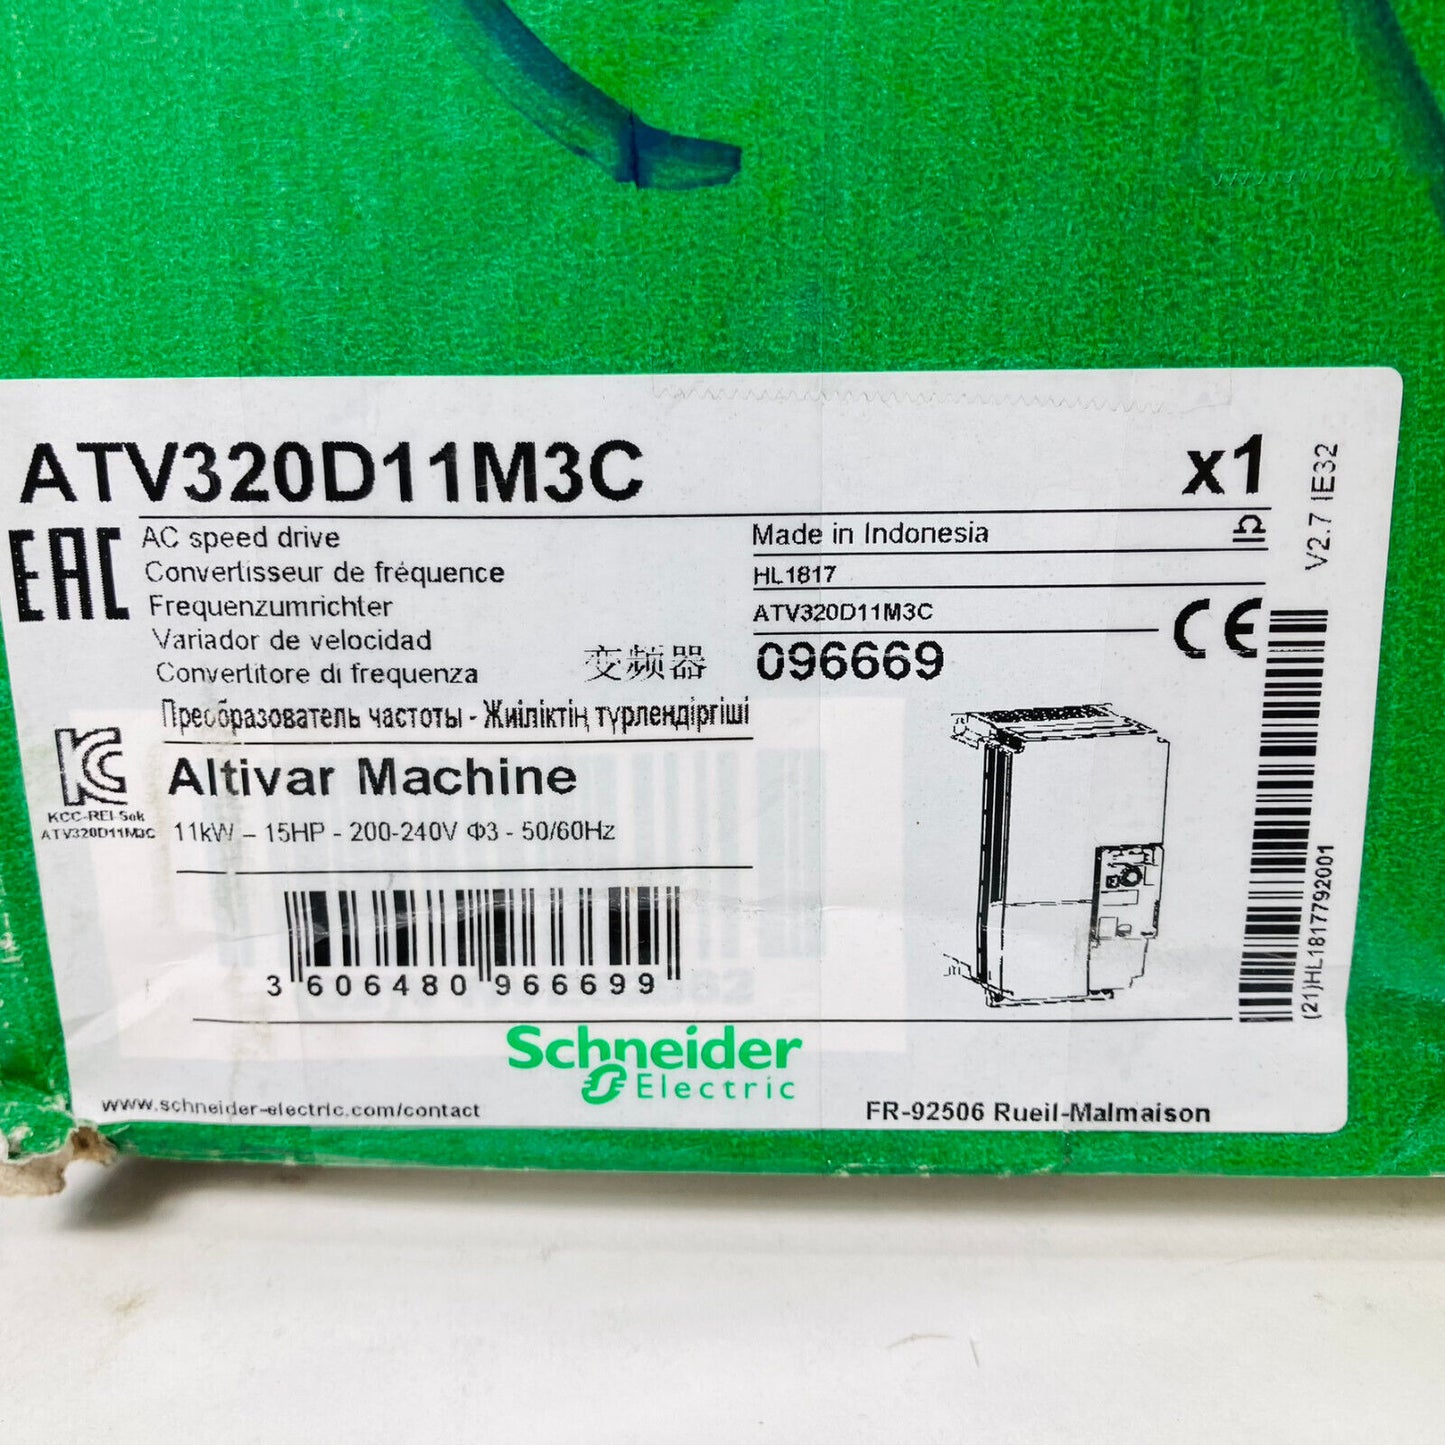 New Schneider ATV320D11M3C Variable Frequency Drive